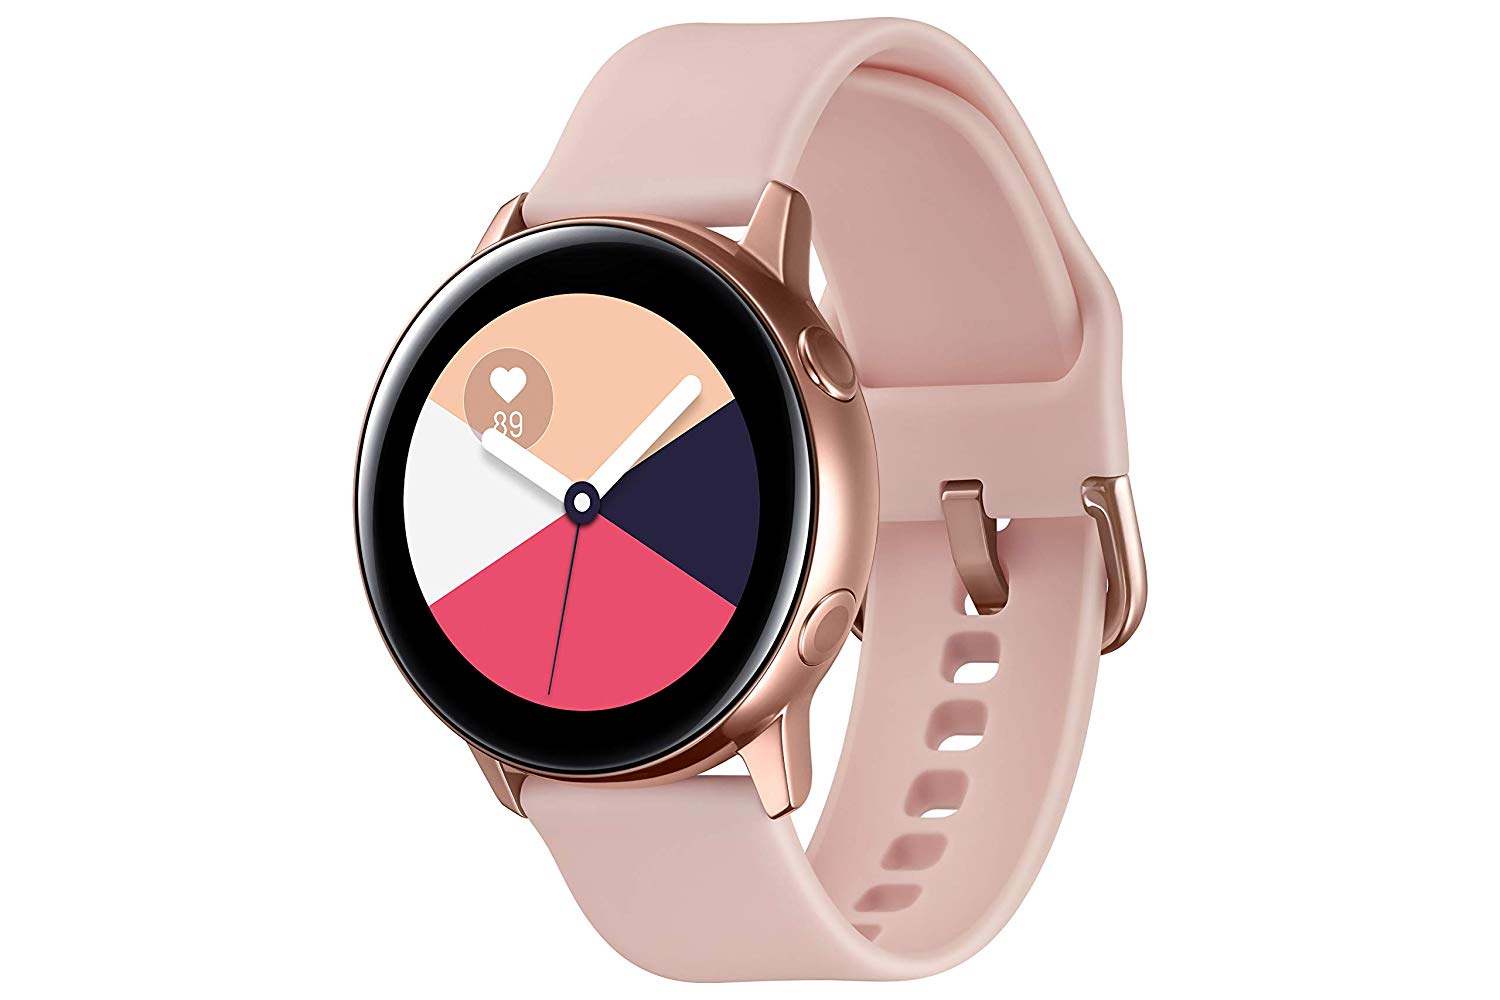 Samsung Galaxy Watch Active Full Specifications